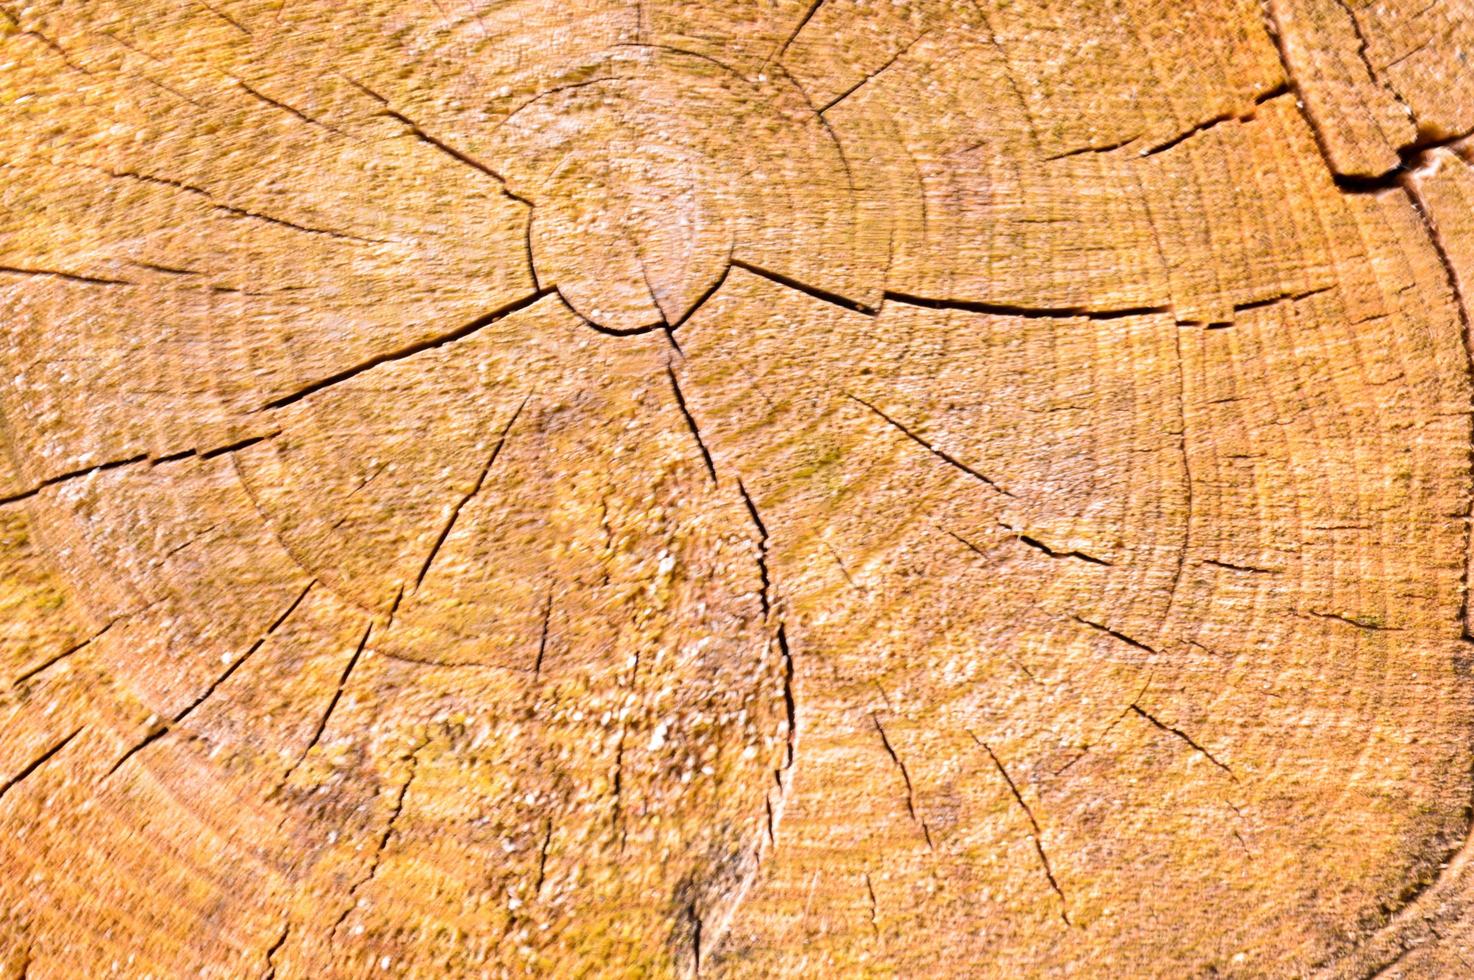 The texture of the wooden sawn log round in the section of the natural with the cracks and the textured yellow brown. The background photo